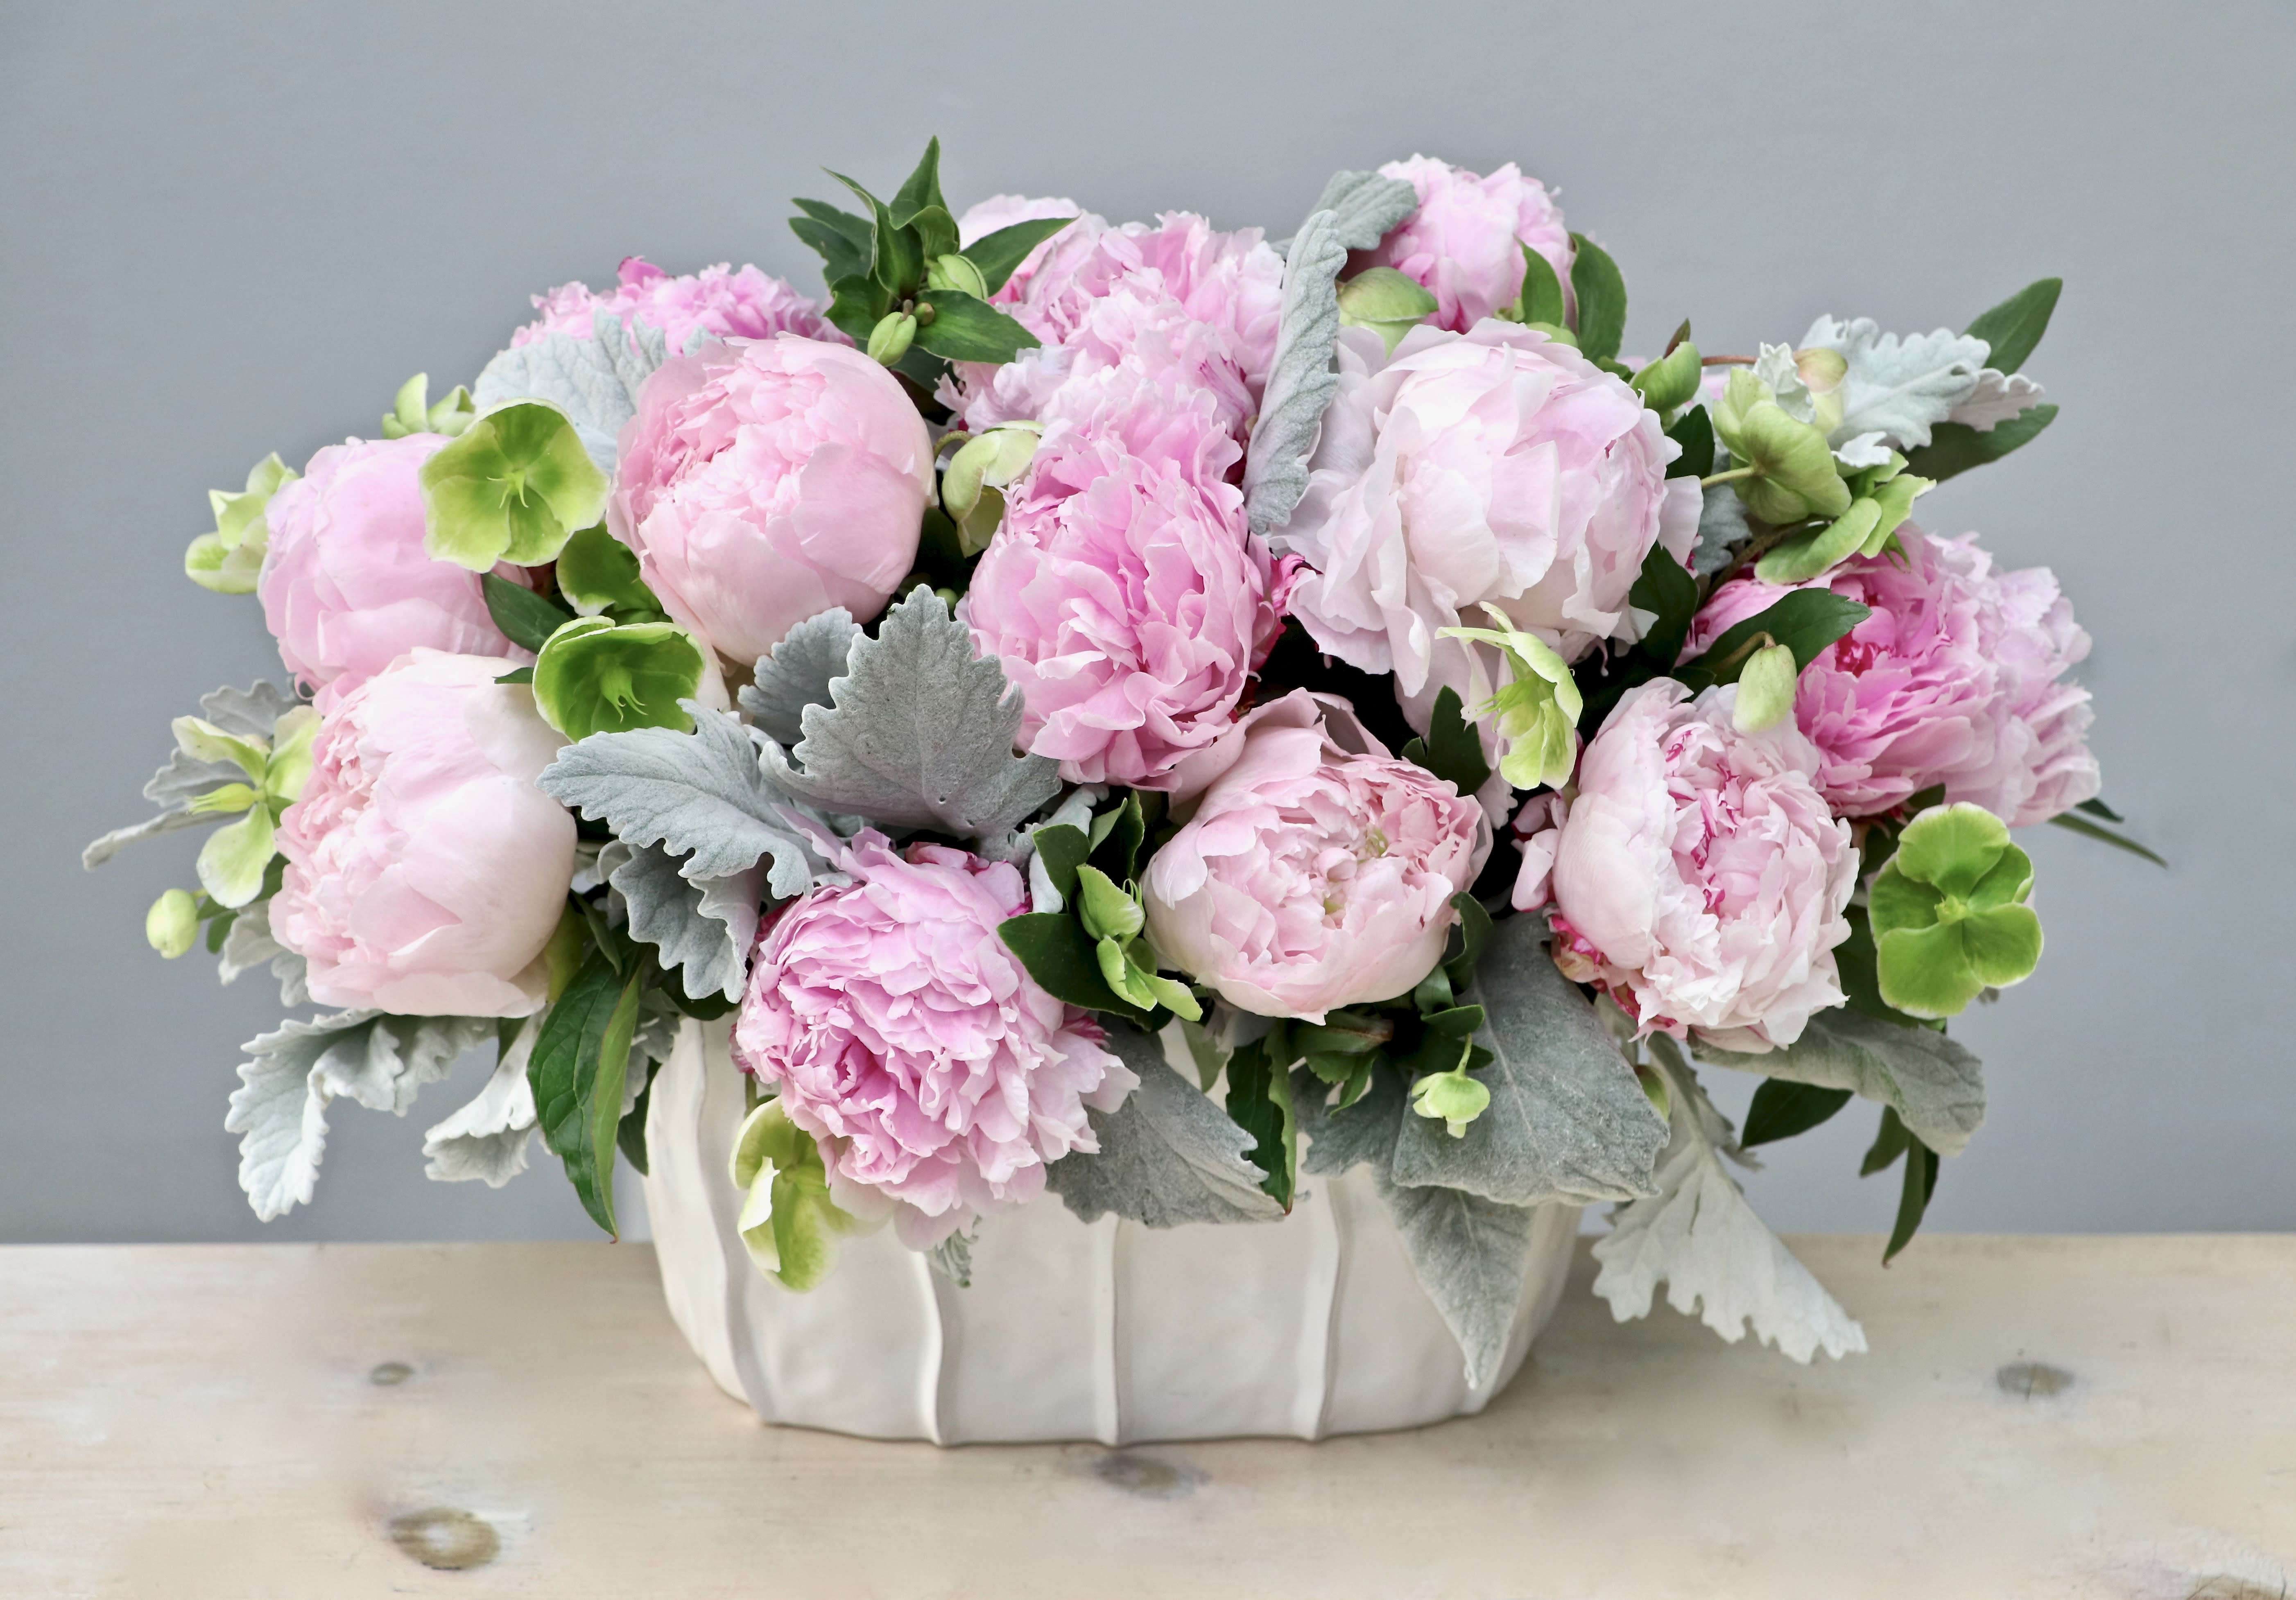 Peony Enchantment - Glendale Florist - Back in season just in time for the holidays, this beautiful arrangement of pink peonies will bring a smile to anyone's face. Make sure to get yours while supplies last. 